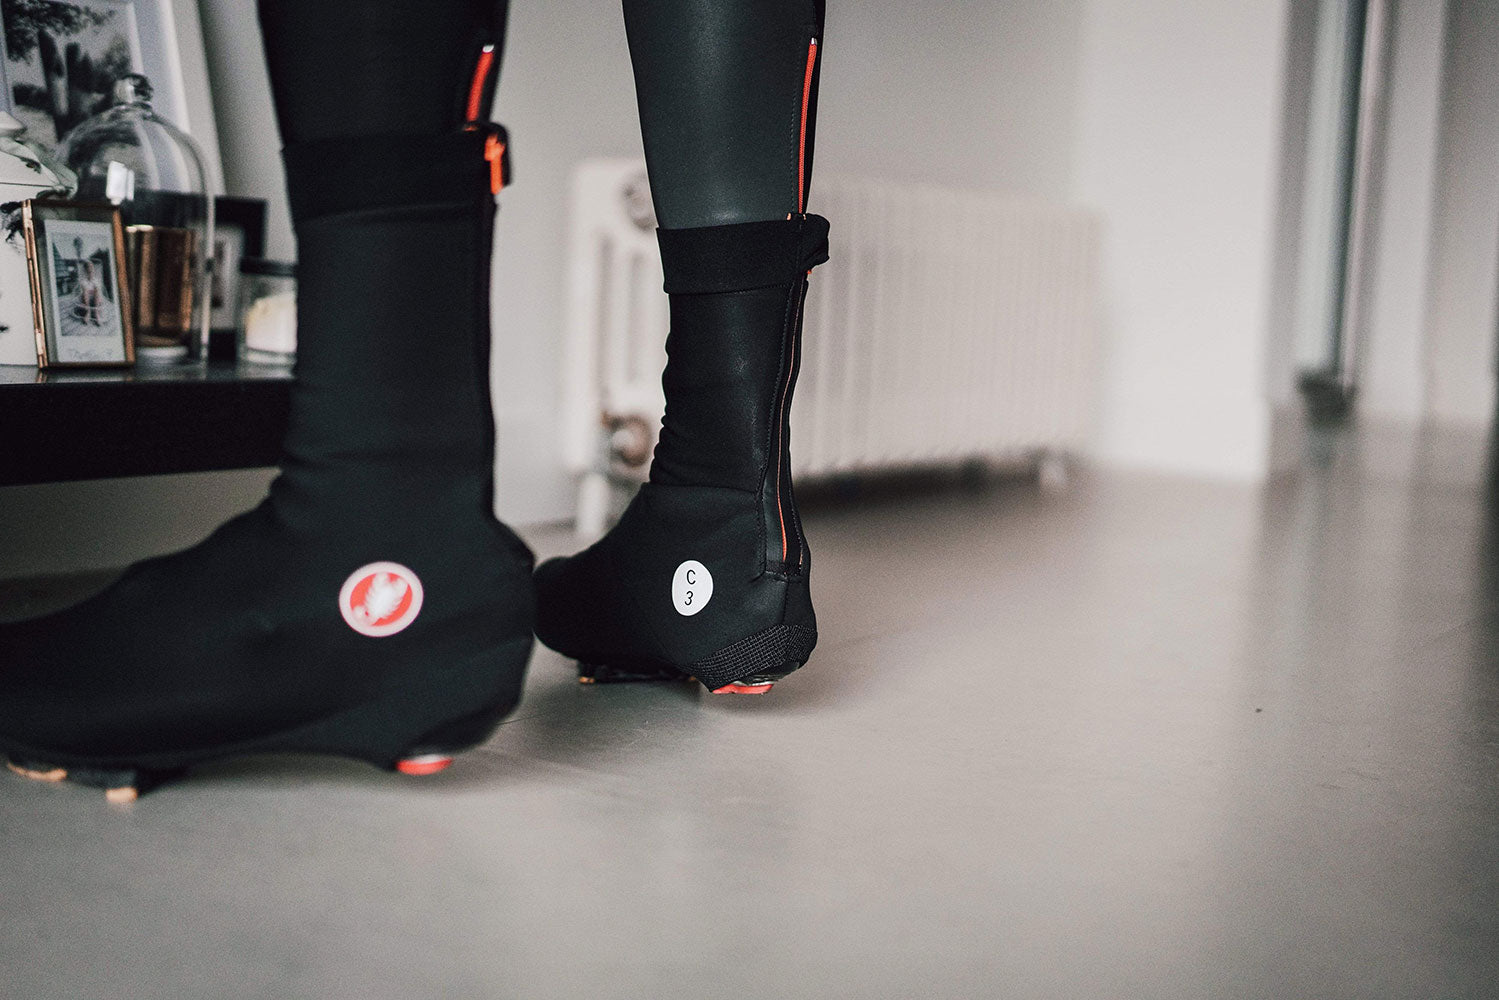 overshoes cycling winter